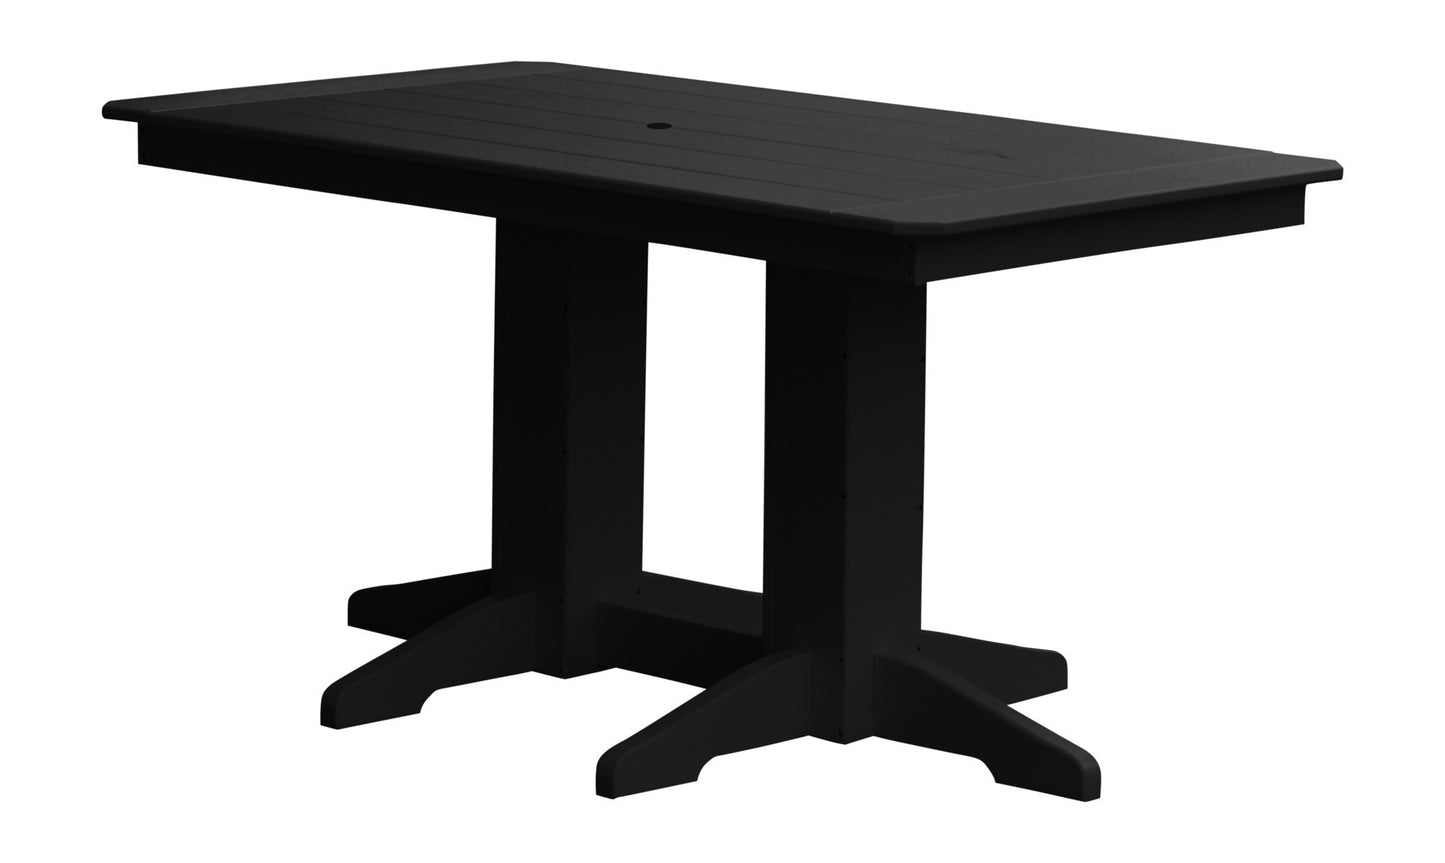 A&L Furniture Company Recycled Plastic 5' Dining Table - Blackl